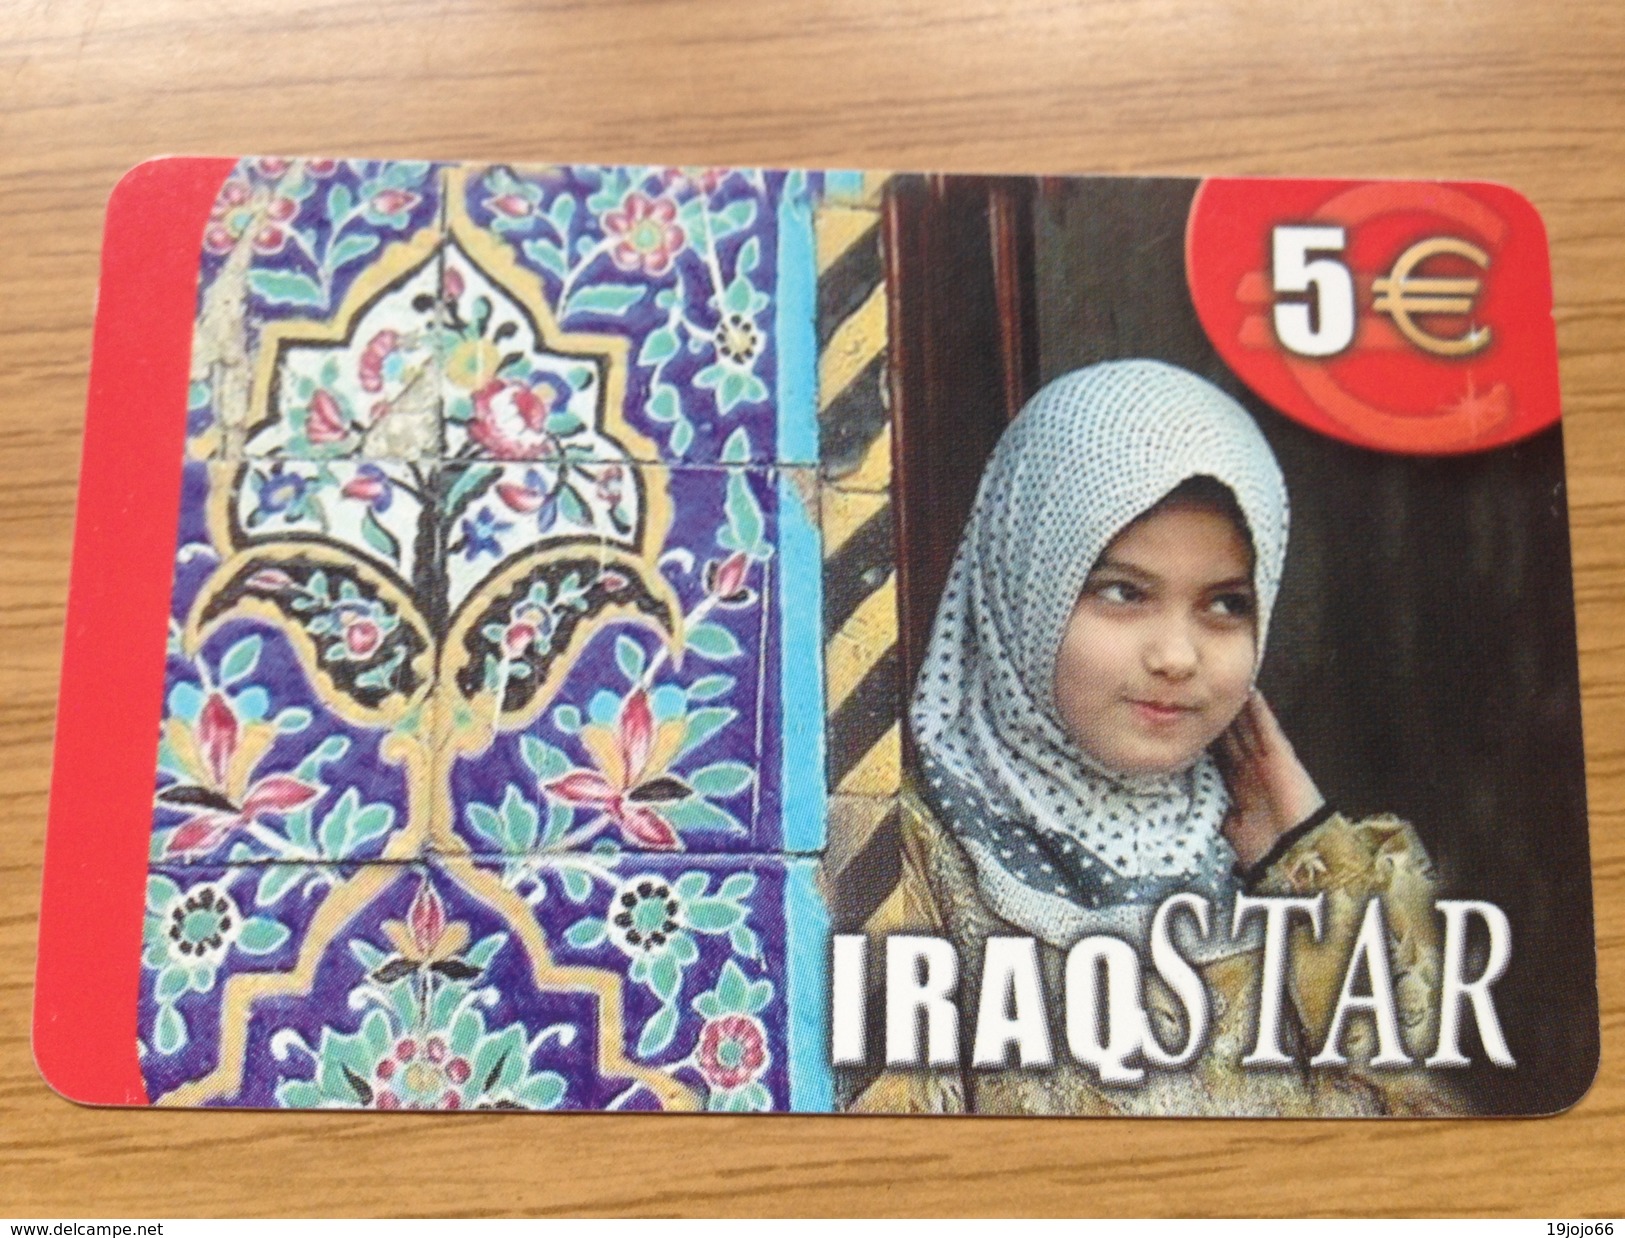 Iraq Star    5&euro;  Little Girl - Little Printed  -   Used Condition - GSM, Cartes Prepayées & Recharges